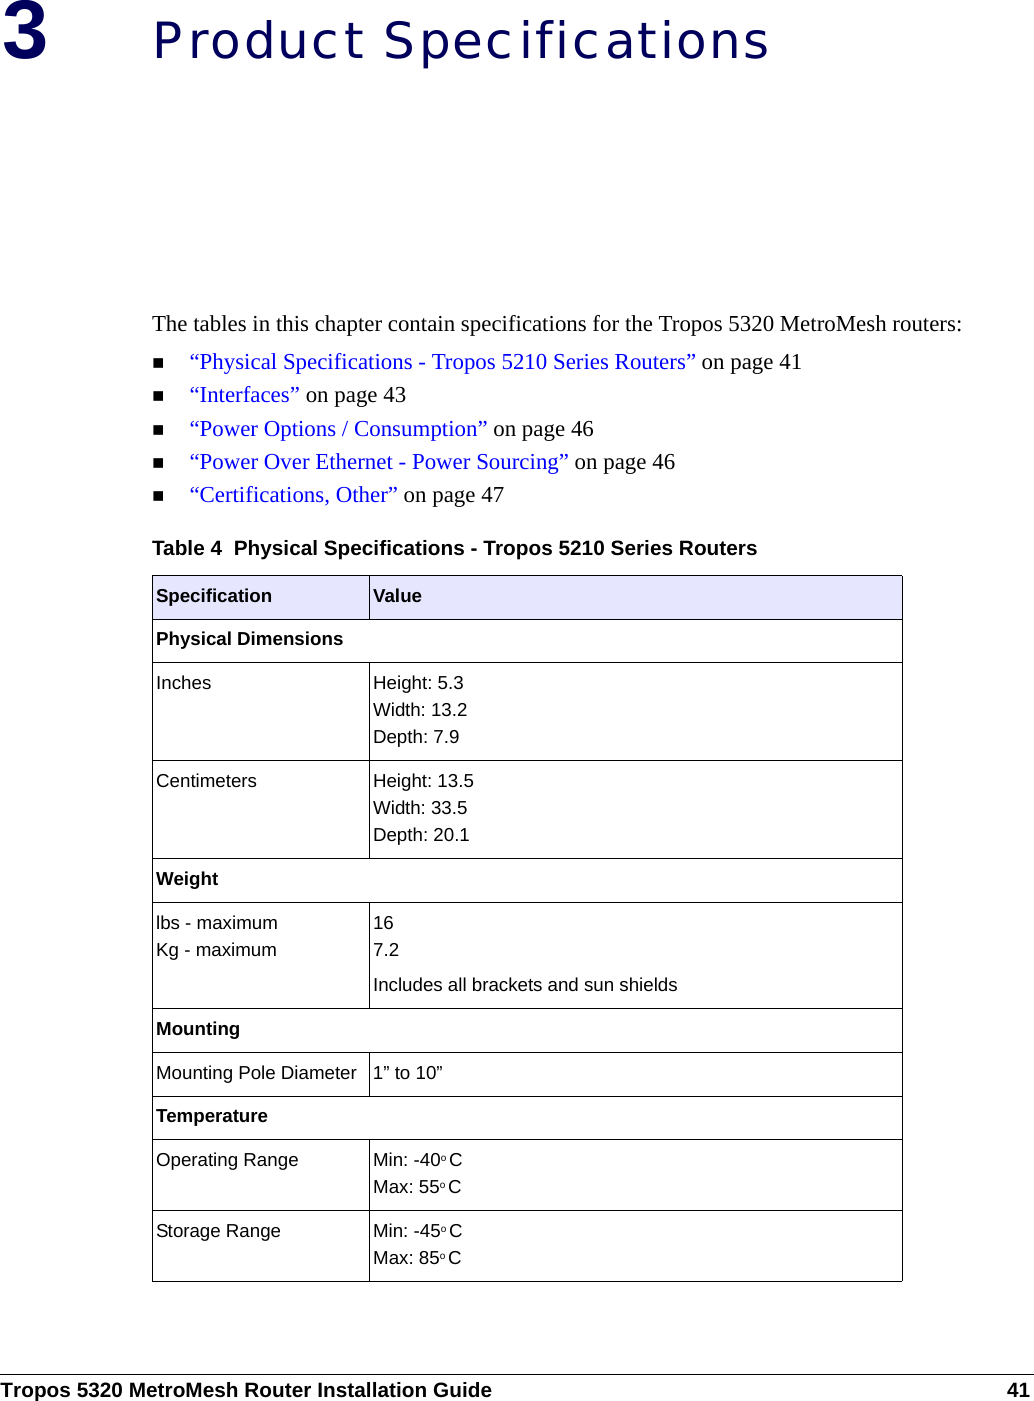 Tropos 5320 MetroMesh Router Installation Guide 413Product SpecificationsThe tables in this chapter contain specifications for the Tropos 5320 MetroMesh routers:“Physical Specifications - Tropos 5210 Series Routers” on page 41“Interfaces” on page 43“Power Options / Consumption” on page 46“Power Over Ethernet - Power Sourcing” on page 46“Certifications, Other” on page 47Table 4  Physical Specifications - Tropos 5210 Series RoutersSpecification ValuePhysical DimensionsInches Height: 5.3Width: 13.2Depth: 7.9Centimeters Height: 13.5Width: 33.5Depth: 20.1Weightlbs - maximum Kg - maximum167.2Includes all brackets and sun shieldsMountingMounting Pole Diameter 1” to 10”TemperatureOperating Range Min: -40o CMax: 55o CStorage Range Min: -45o CMax: 85o C